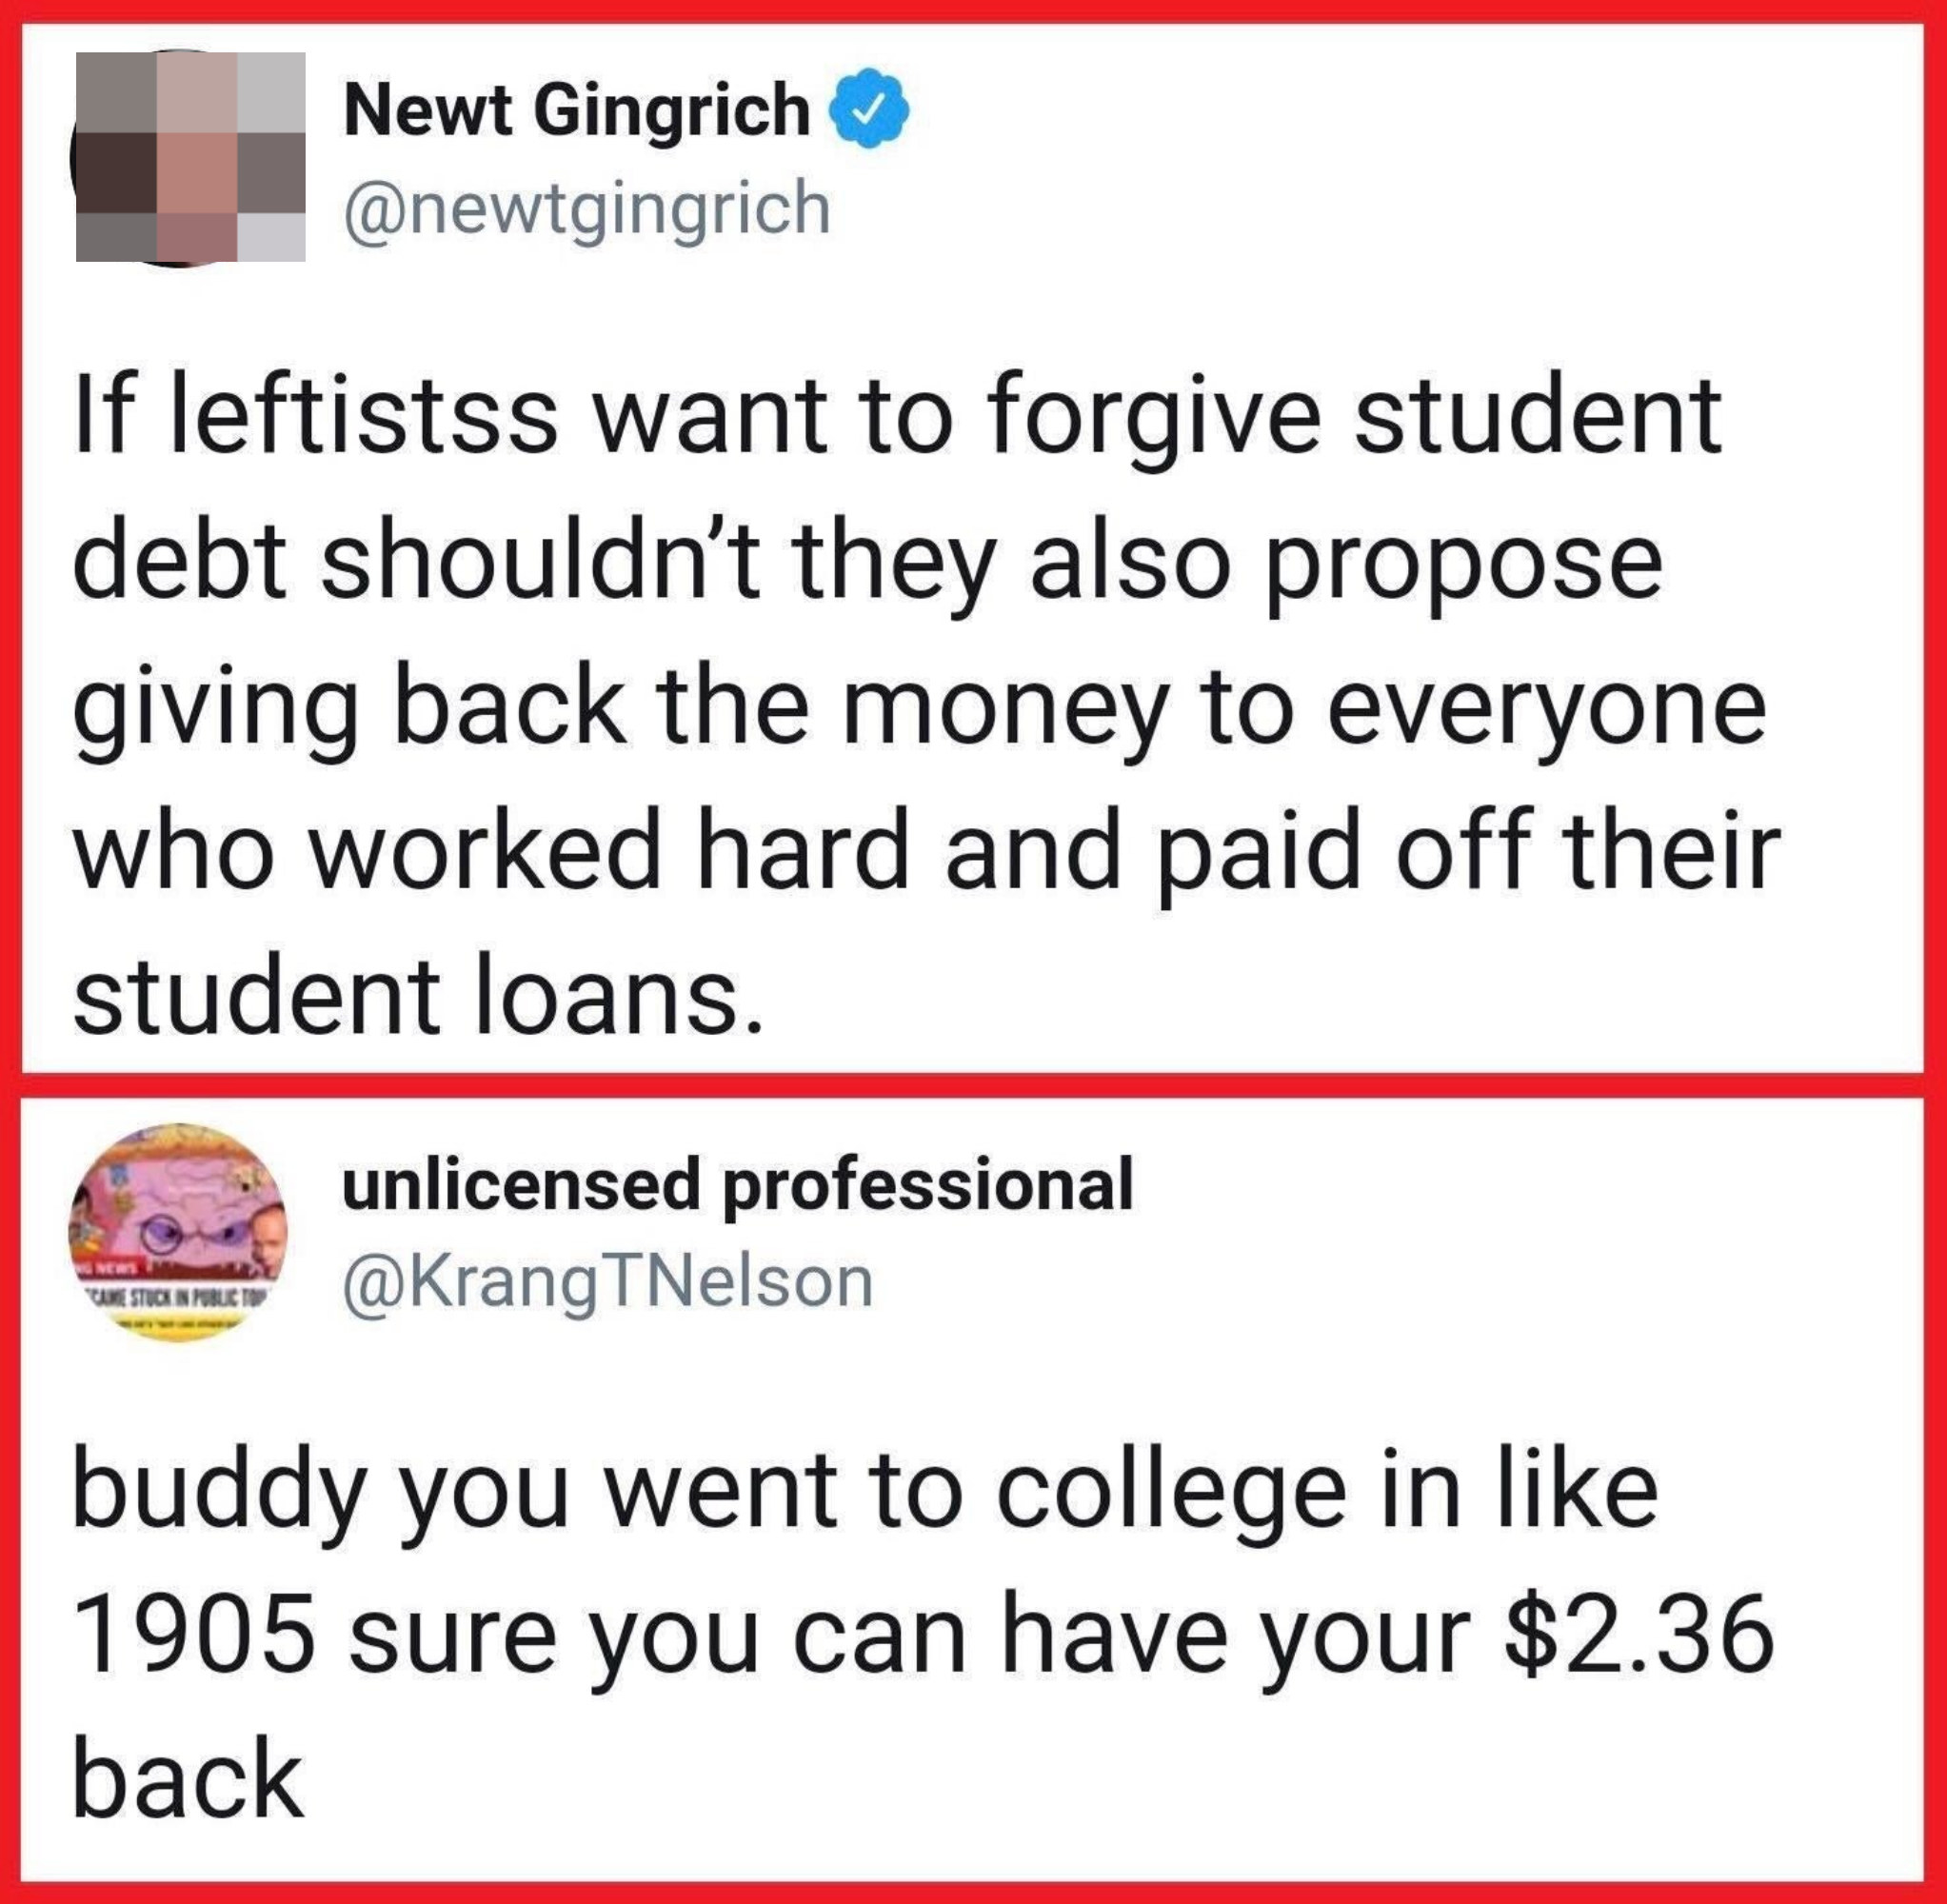 newt gingrich being roasted for his take on student loans